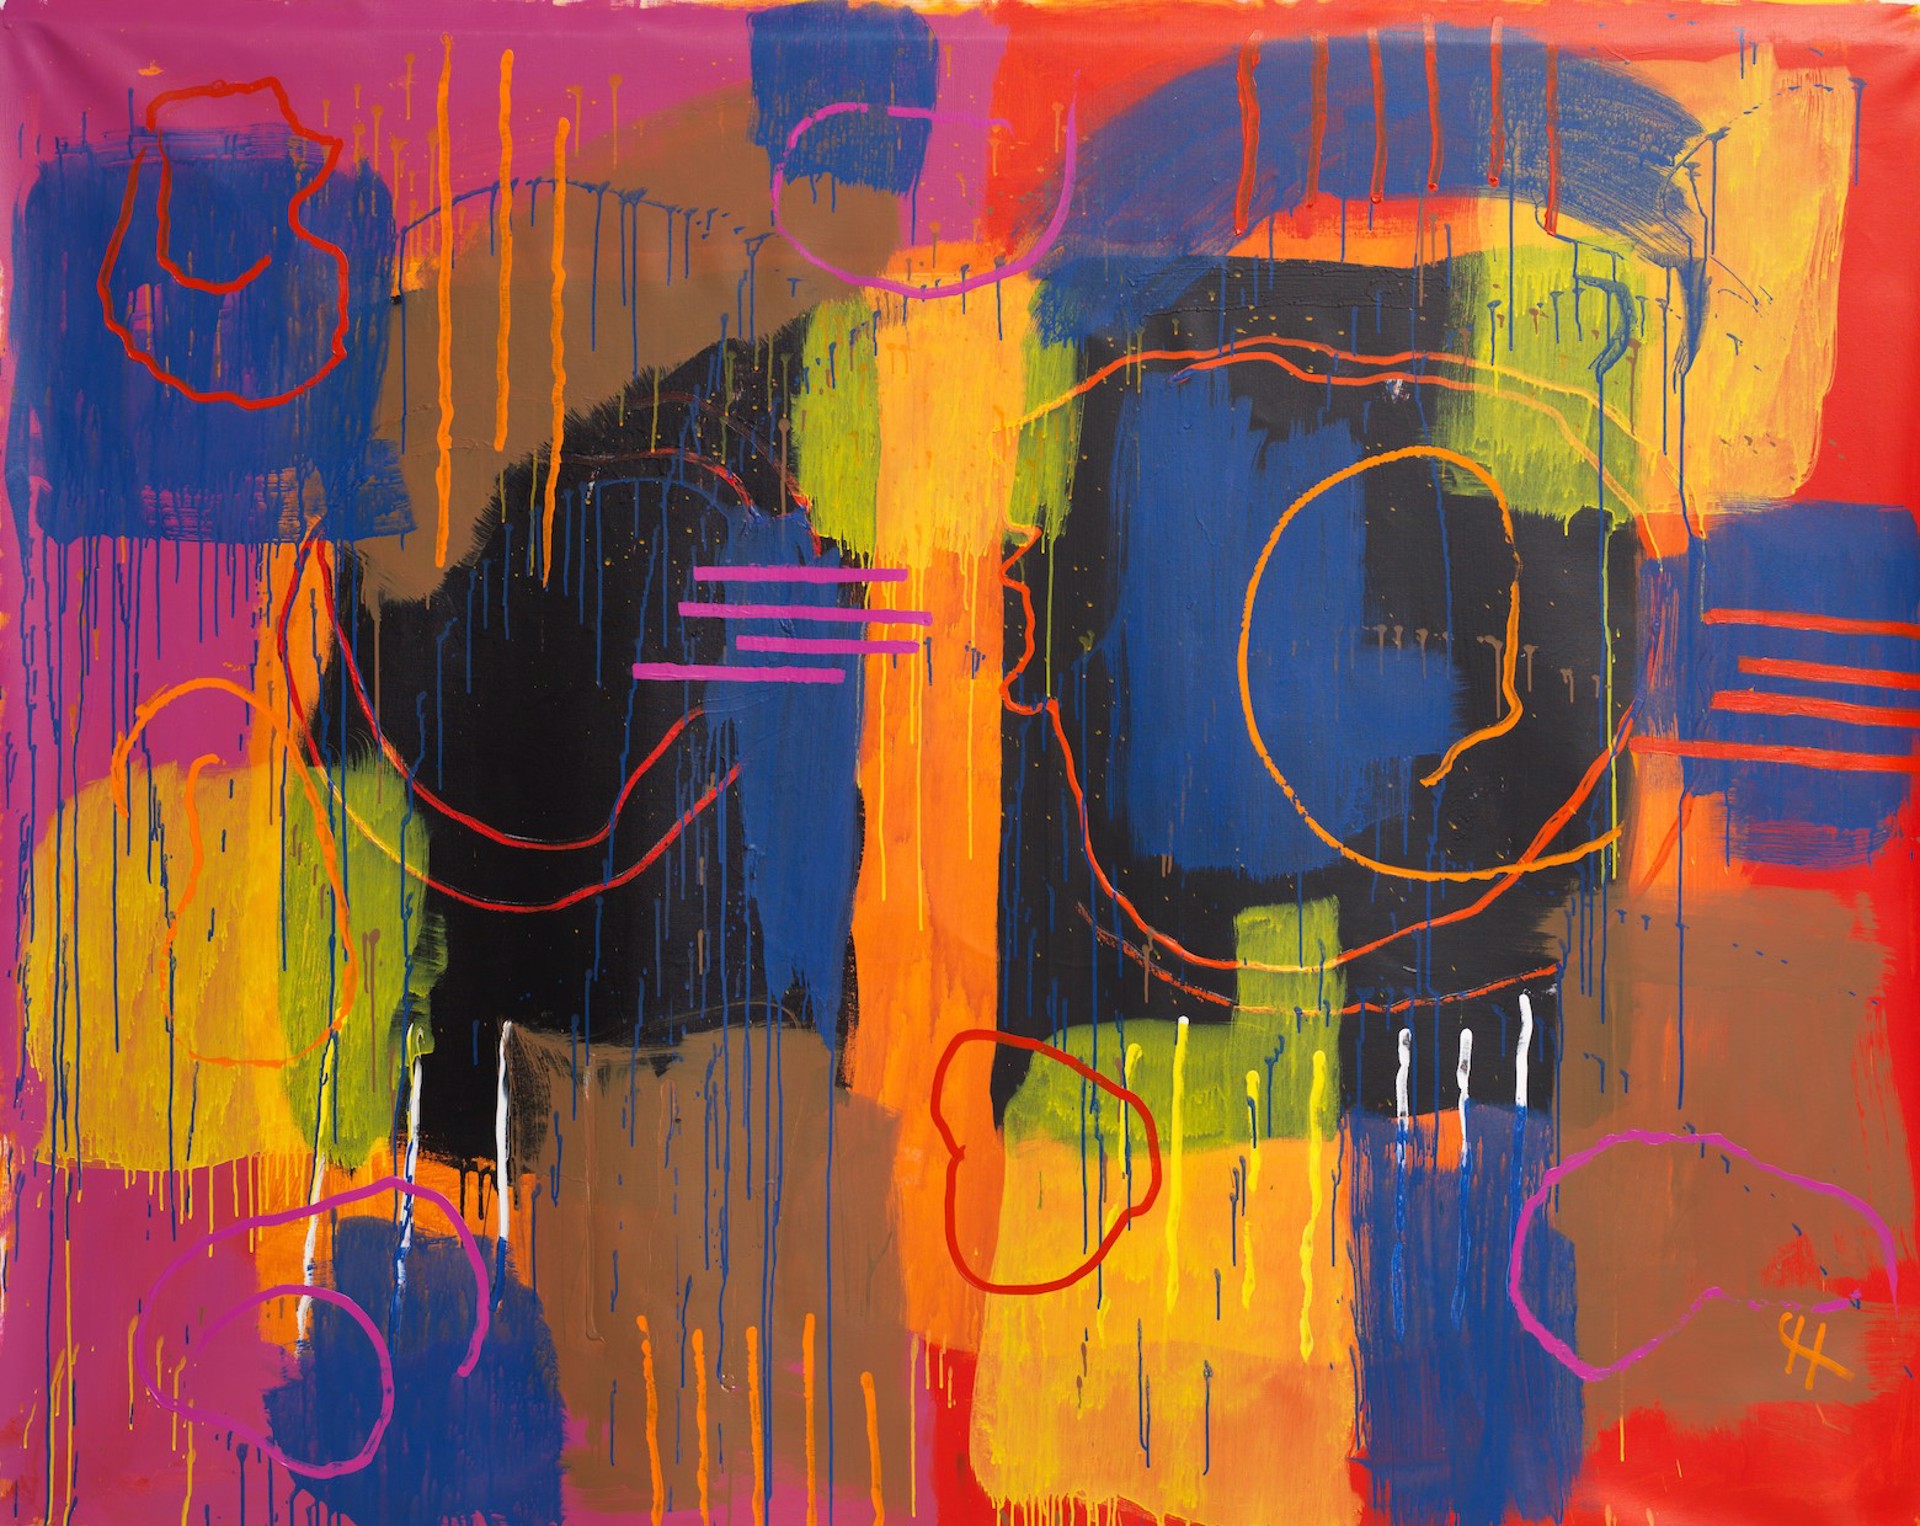 Total Abstraction No. 5 by Hans Petersen